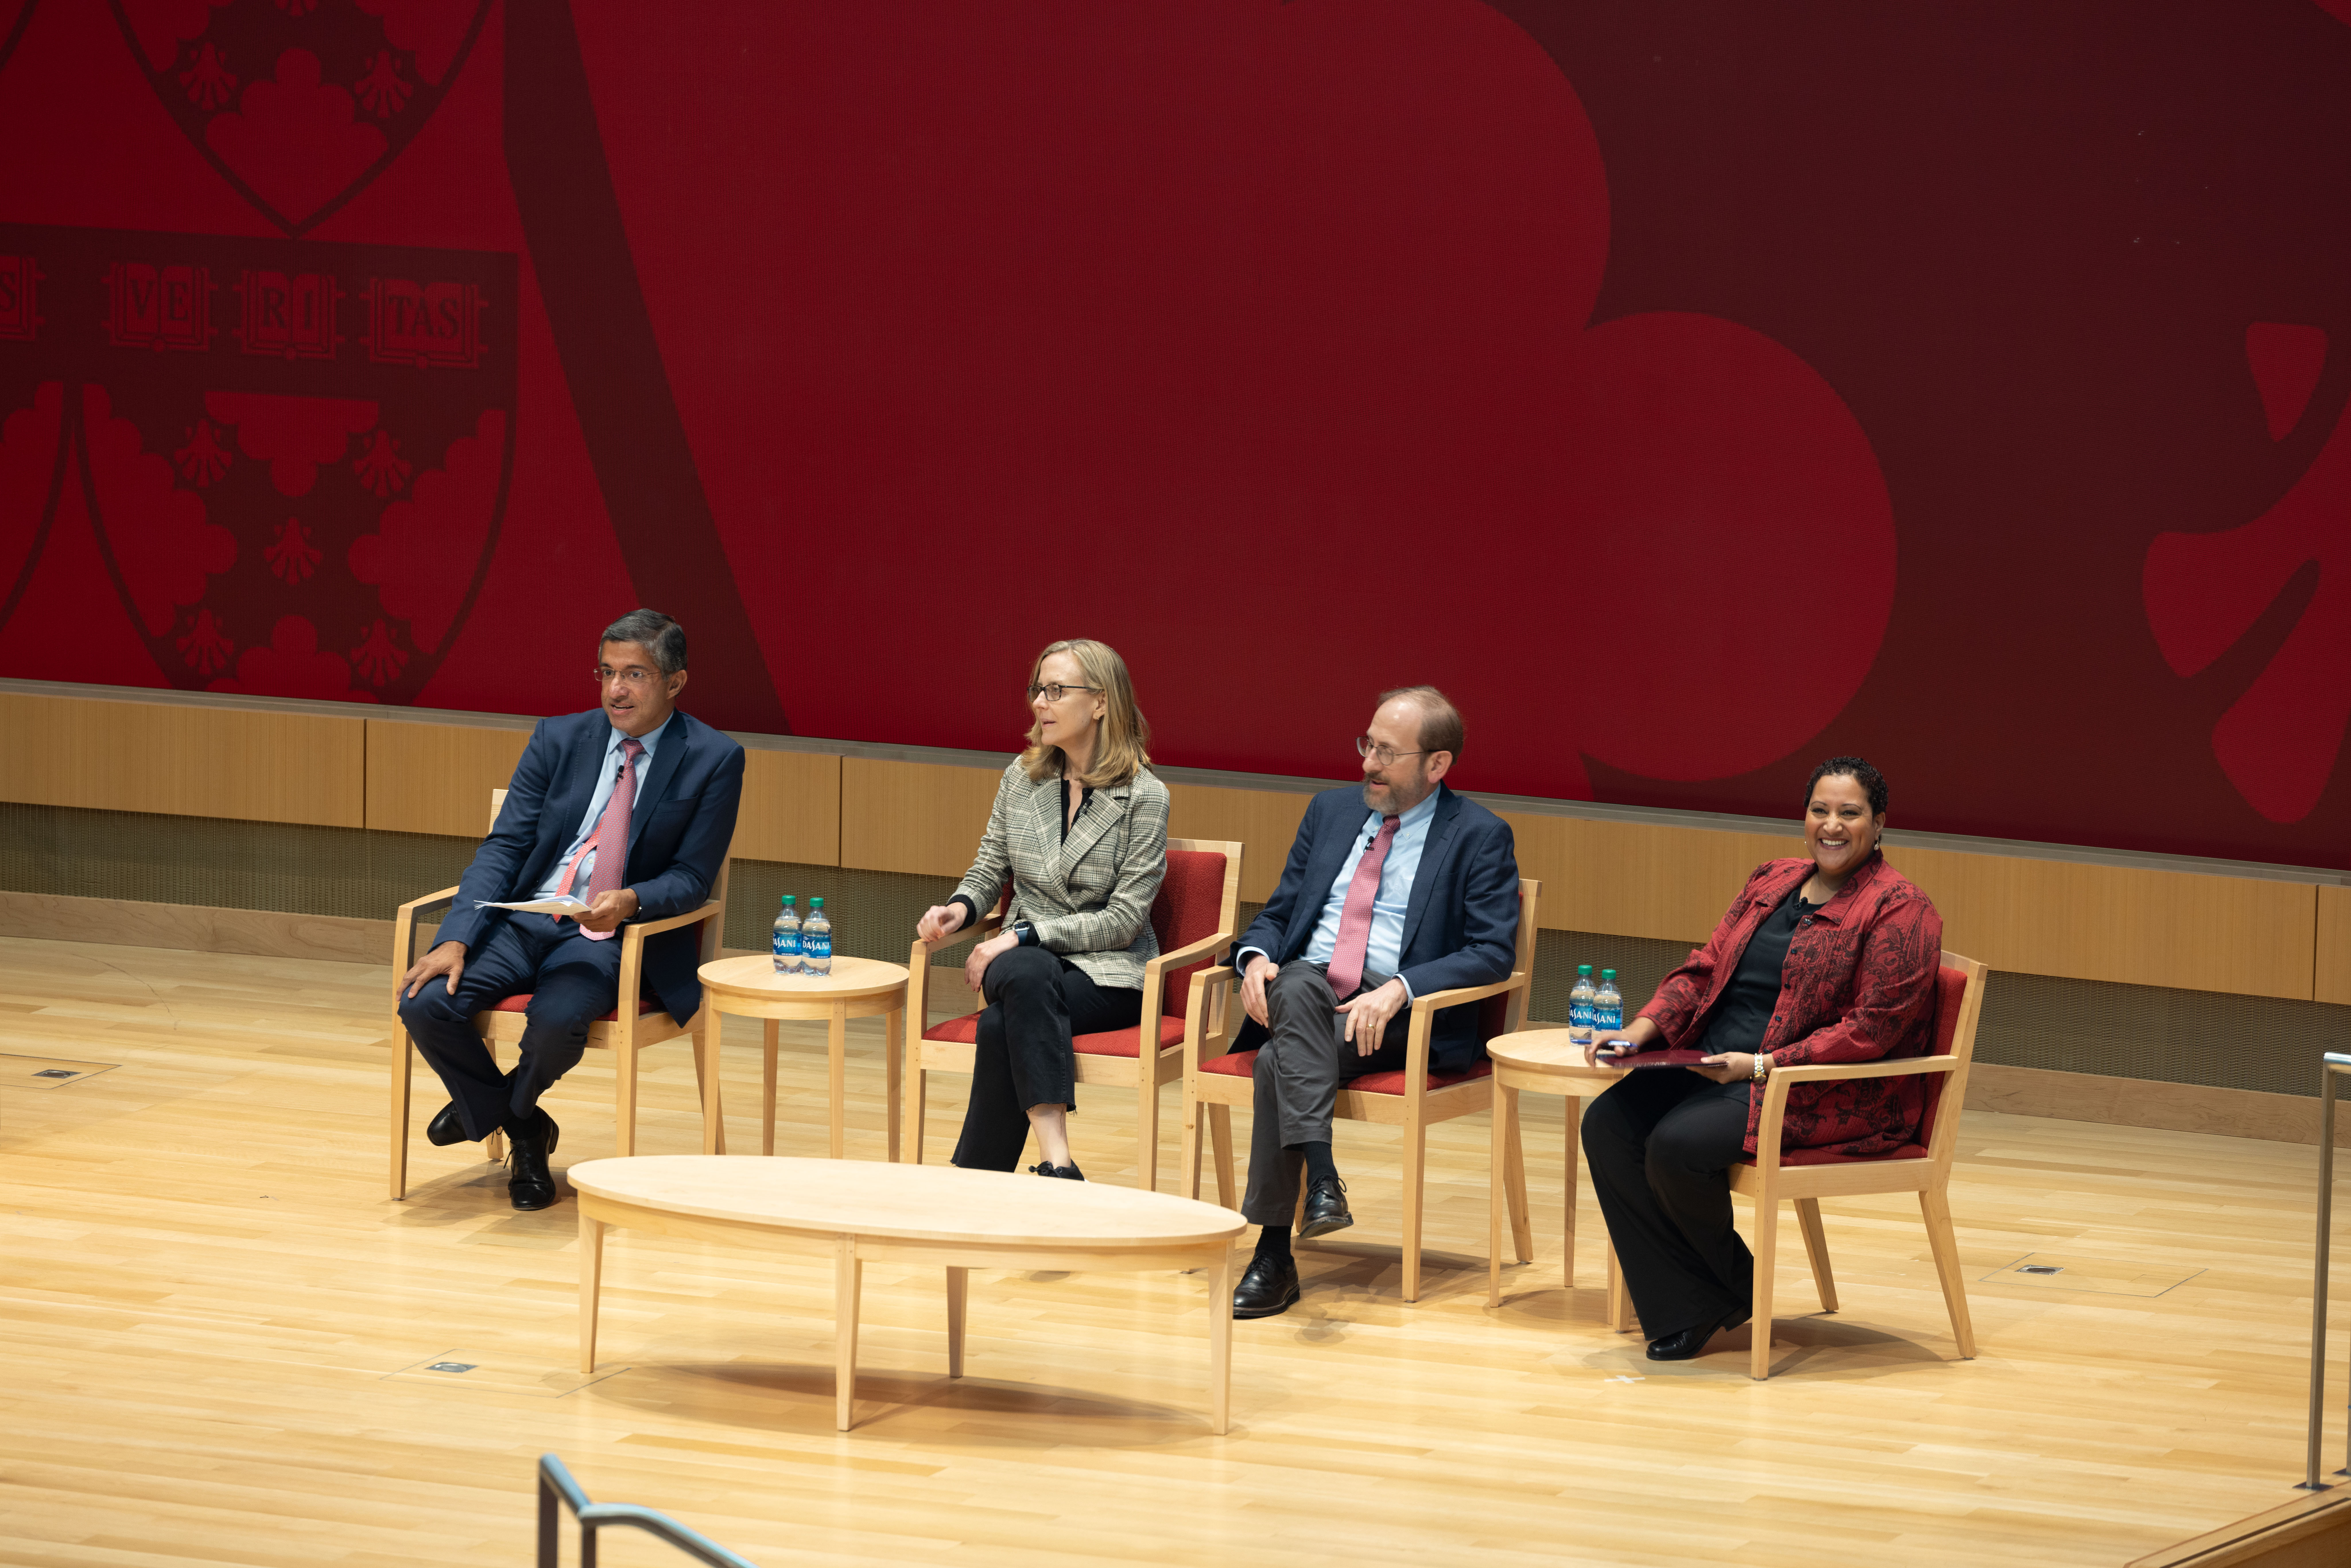 Afternoon plenary session. (Our speakers on stage from left to right) Bharat Anand, Amanda Claybaugh, Provost Alan M. Garber, Tsedal Neeley in conversation with audience.